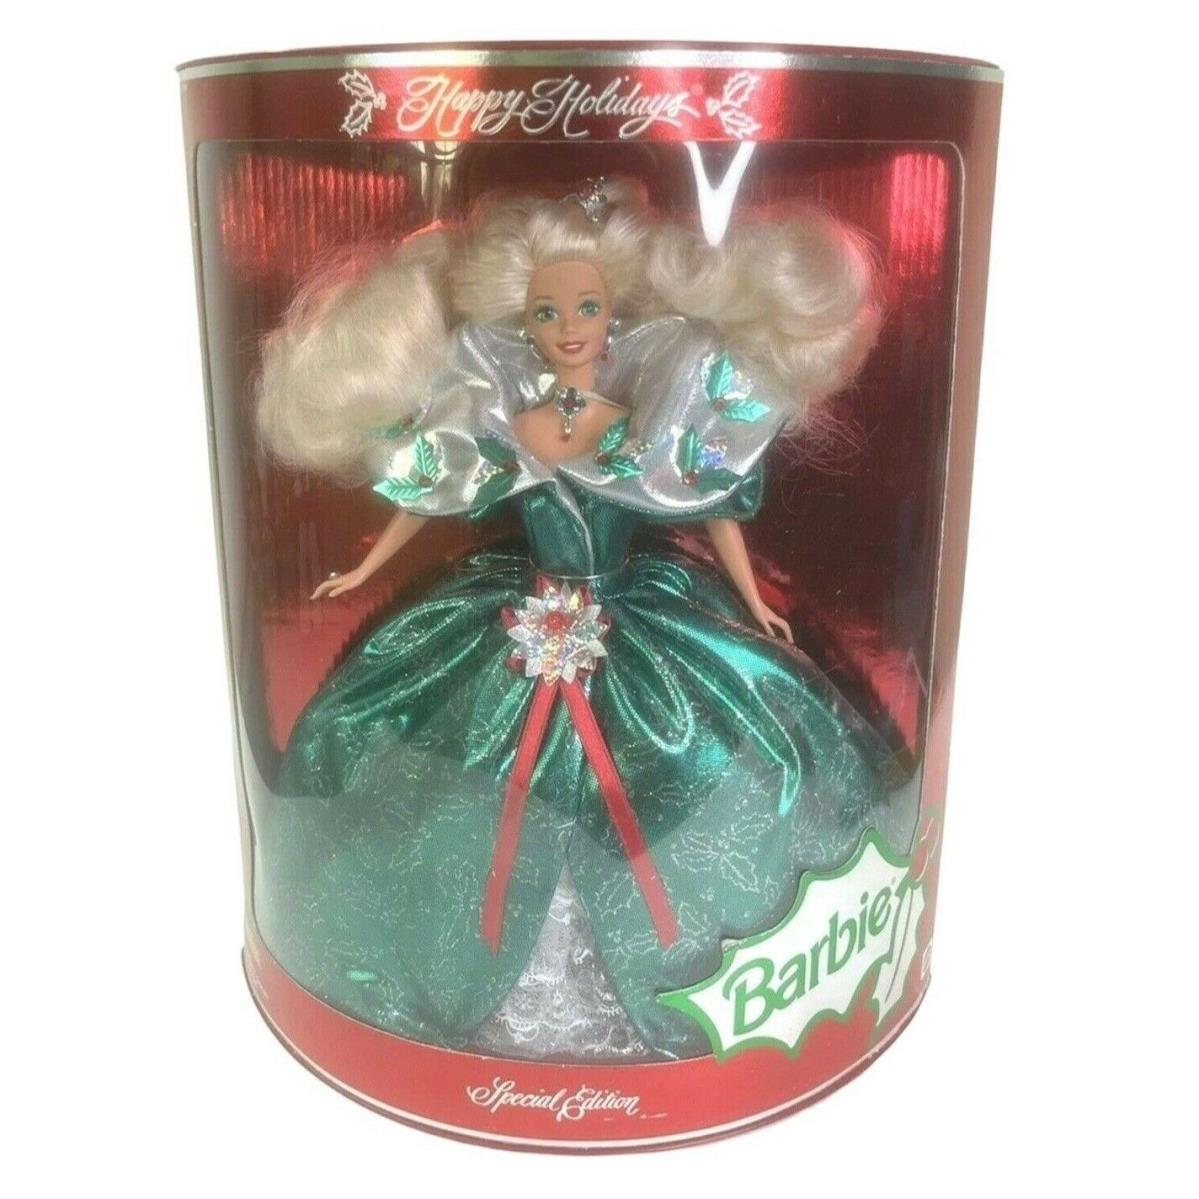 Barbie Doll Vintage 1995 Happy Holidays Special Edition Collector Gift Nrfb